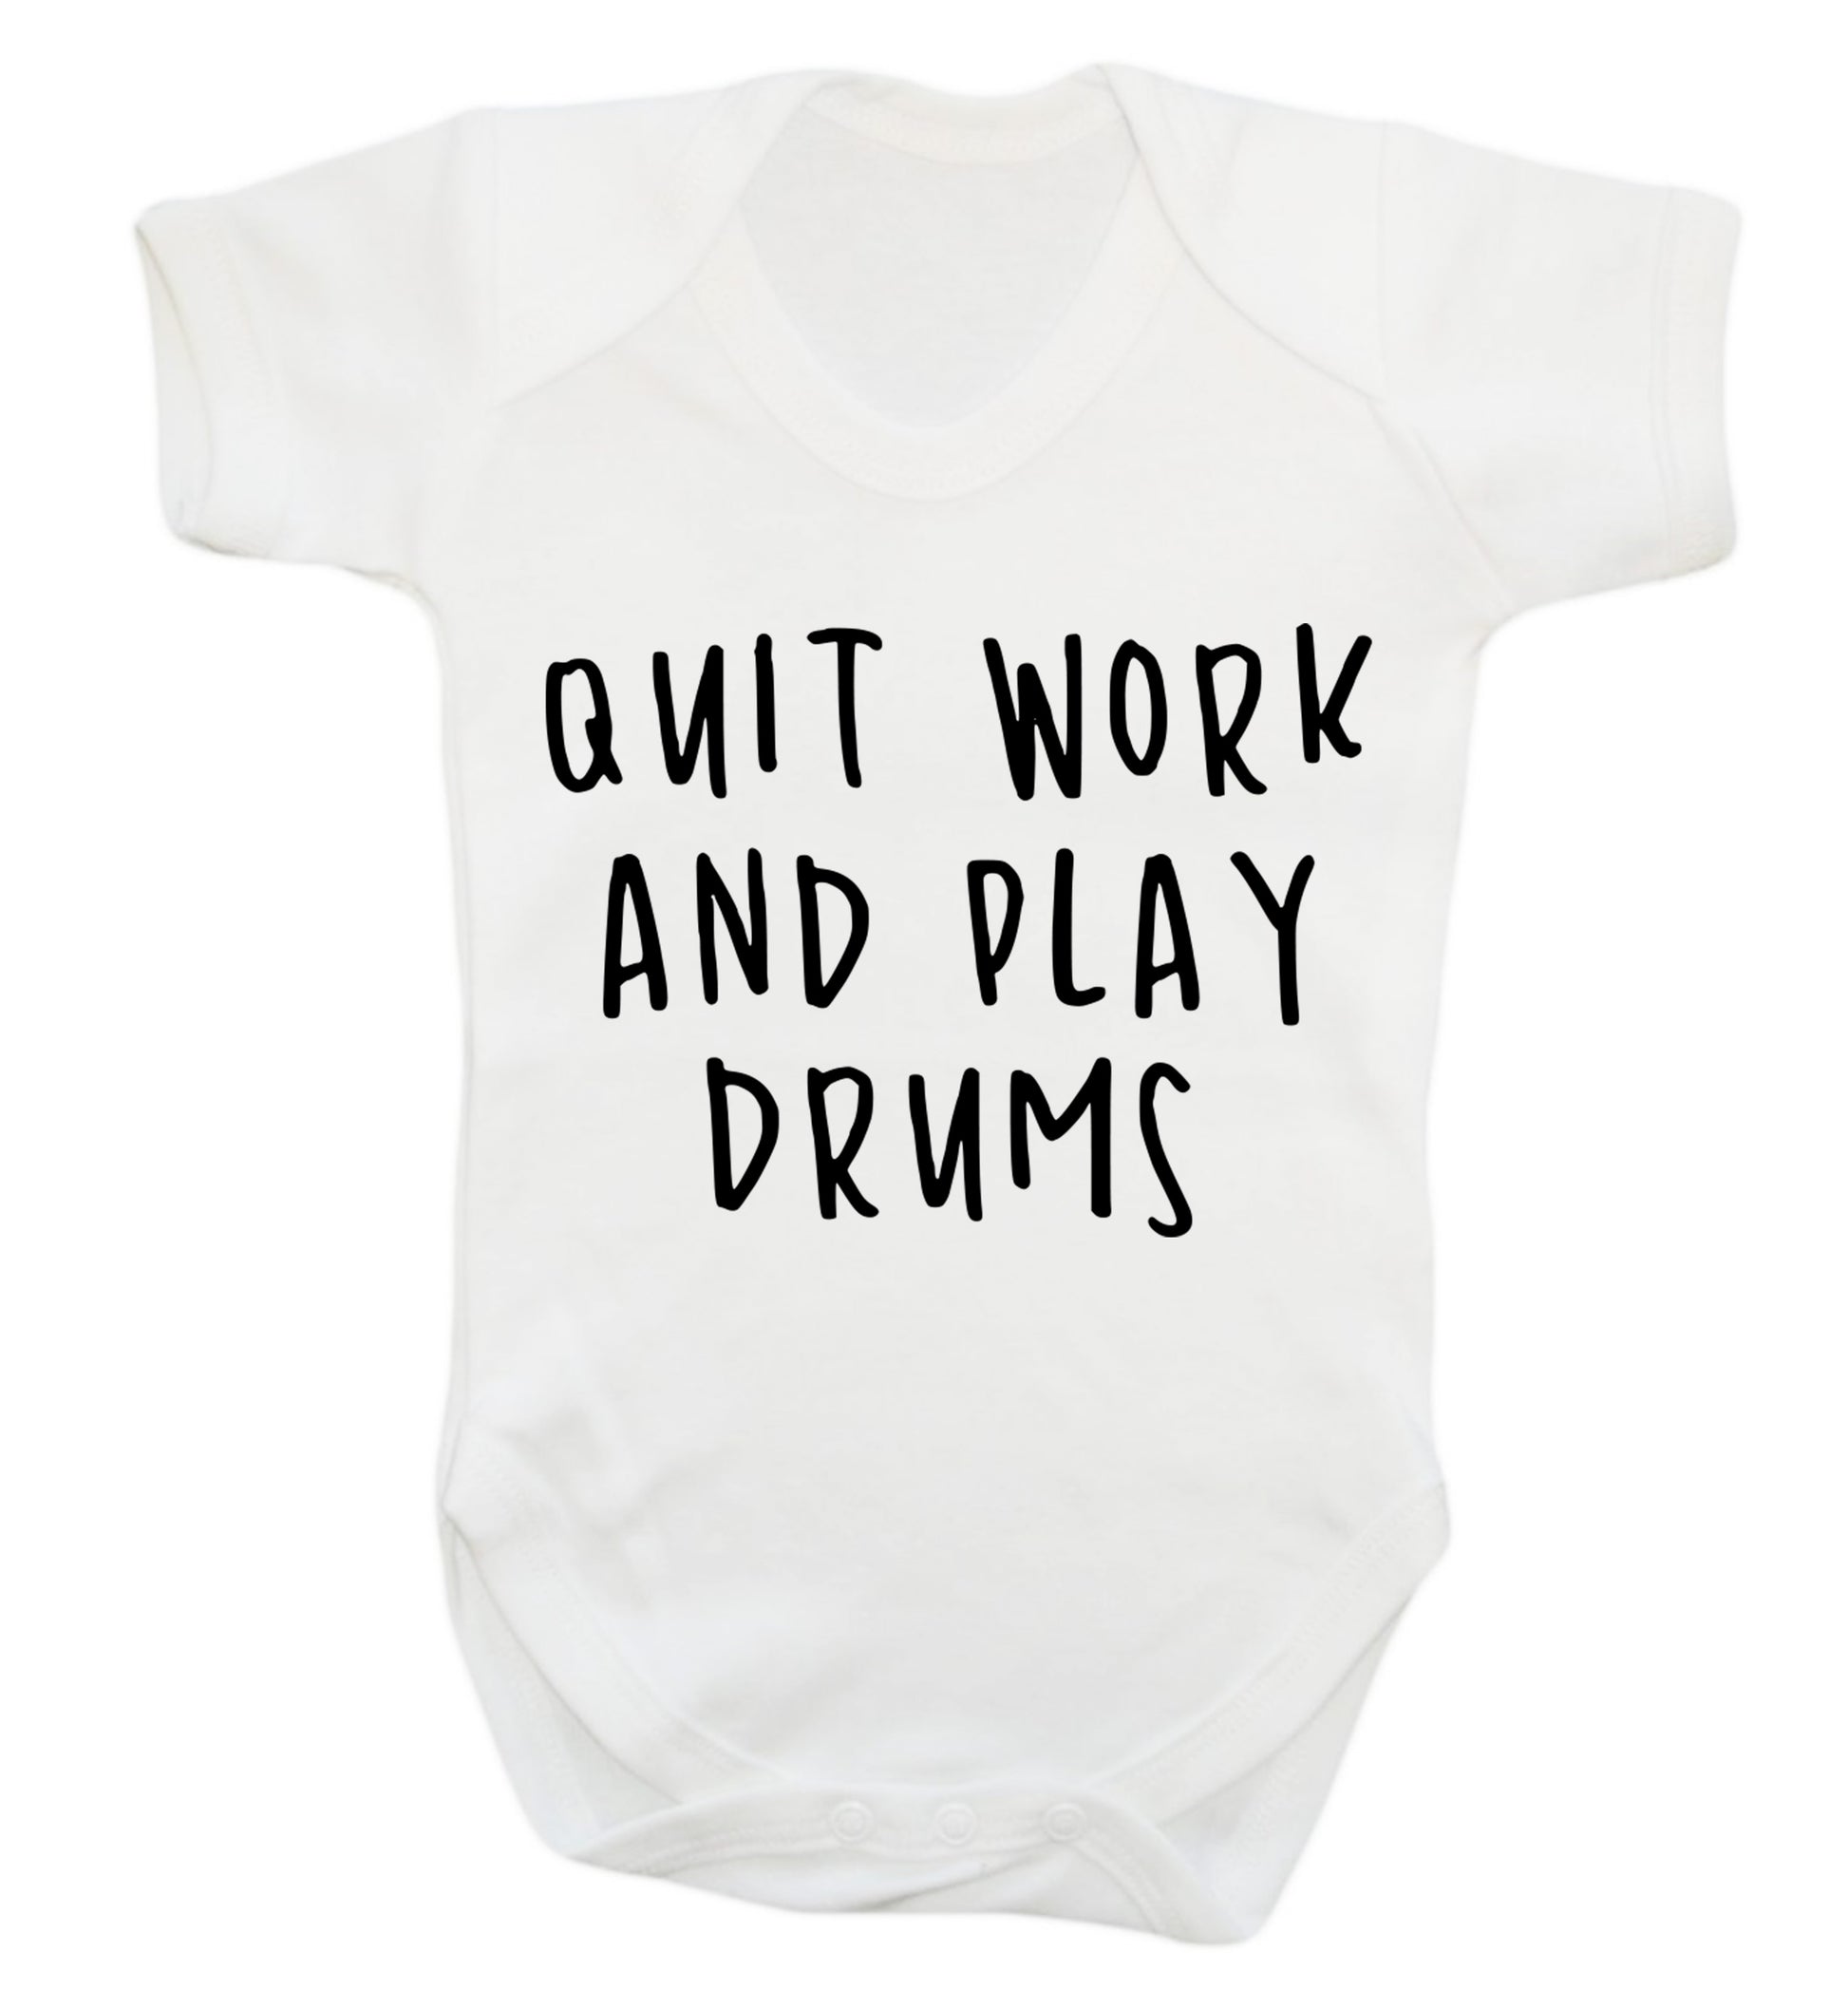 Quit work and play drums Baby Vest white 18-24 months